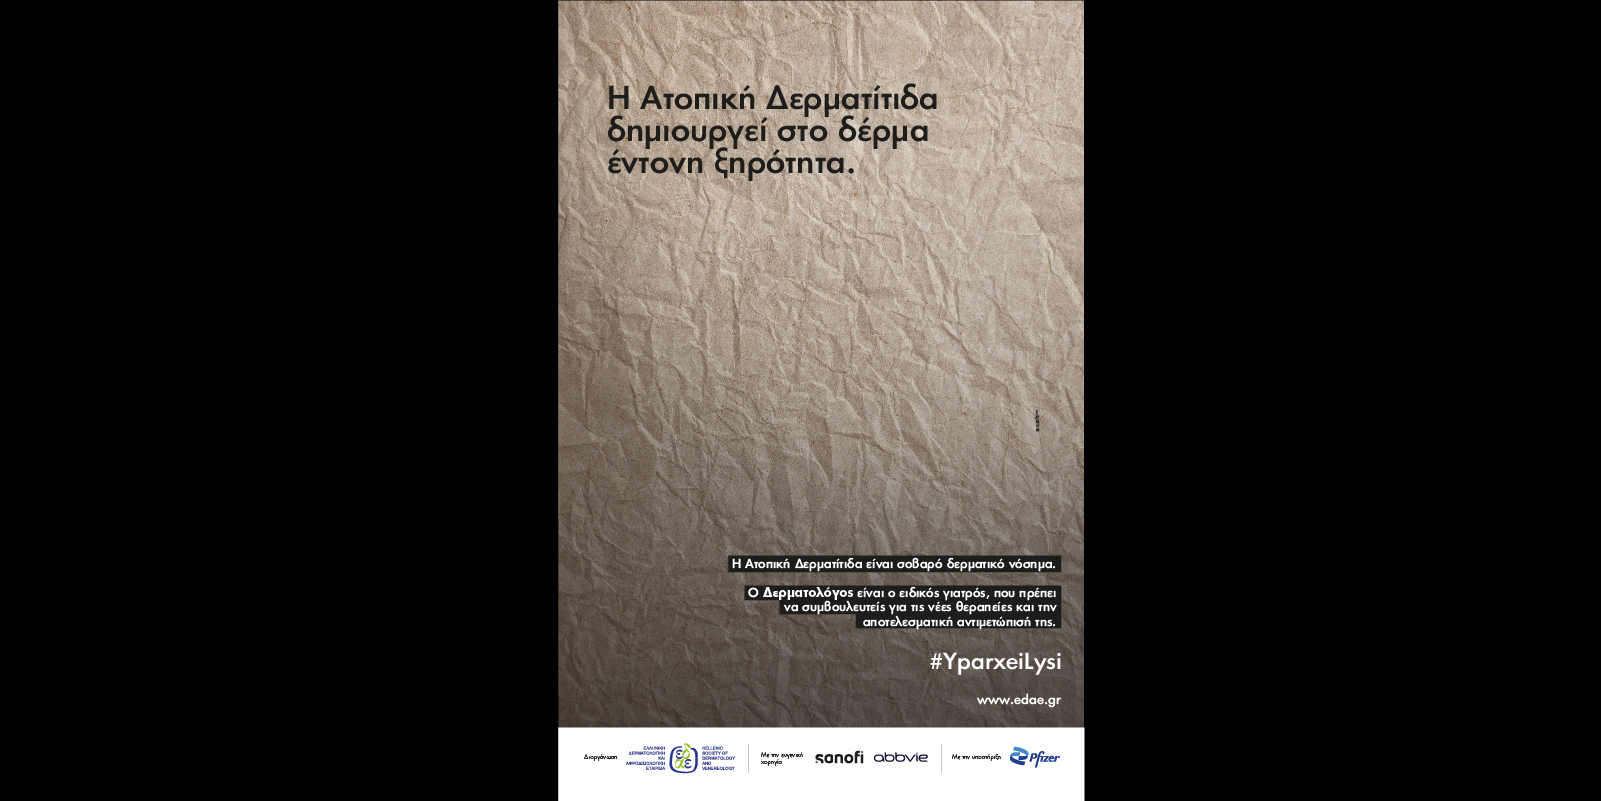 HELLENIC SOCIETY OF DERMATOLOGY AND VENEREOLOGY – ATOPIC DERMATITIS CAMPAIGN